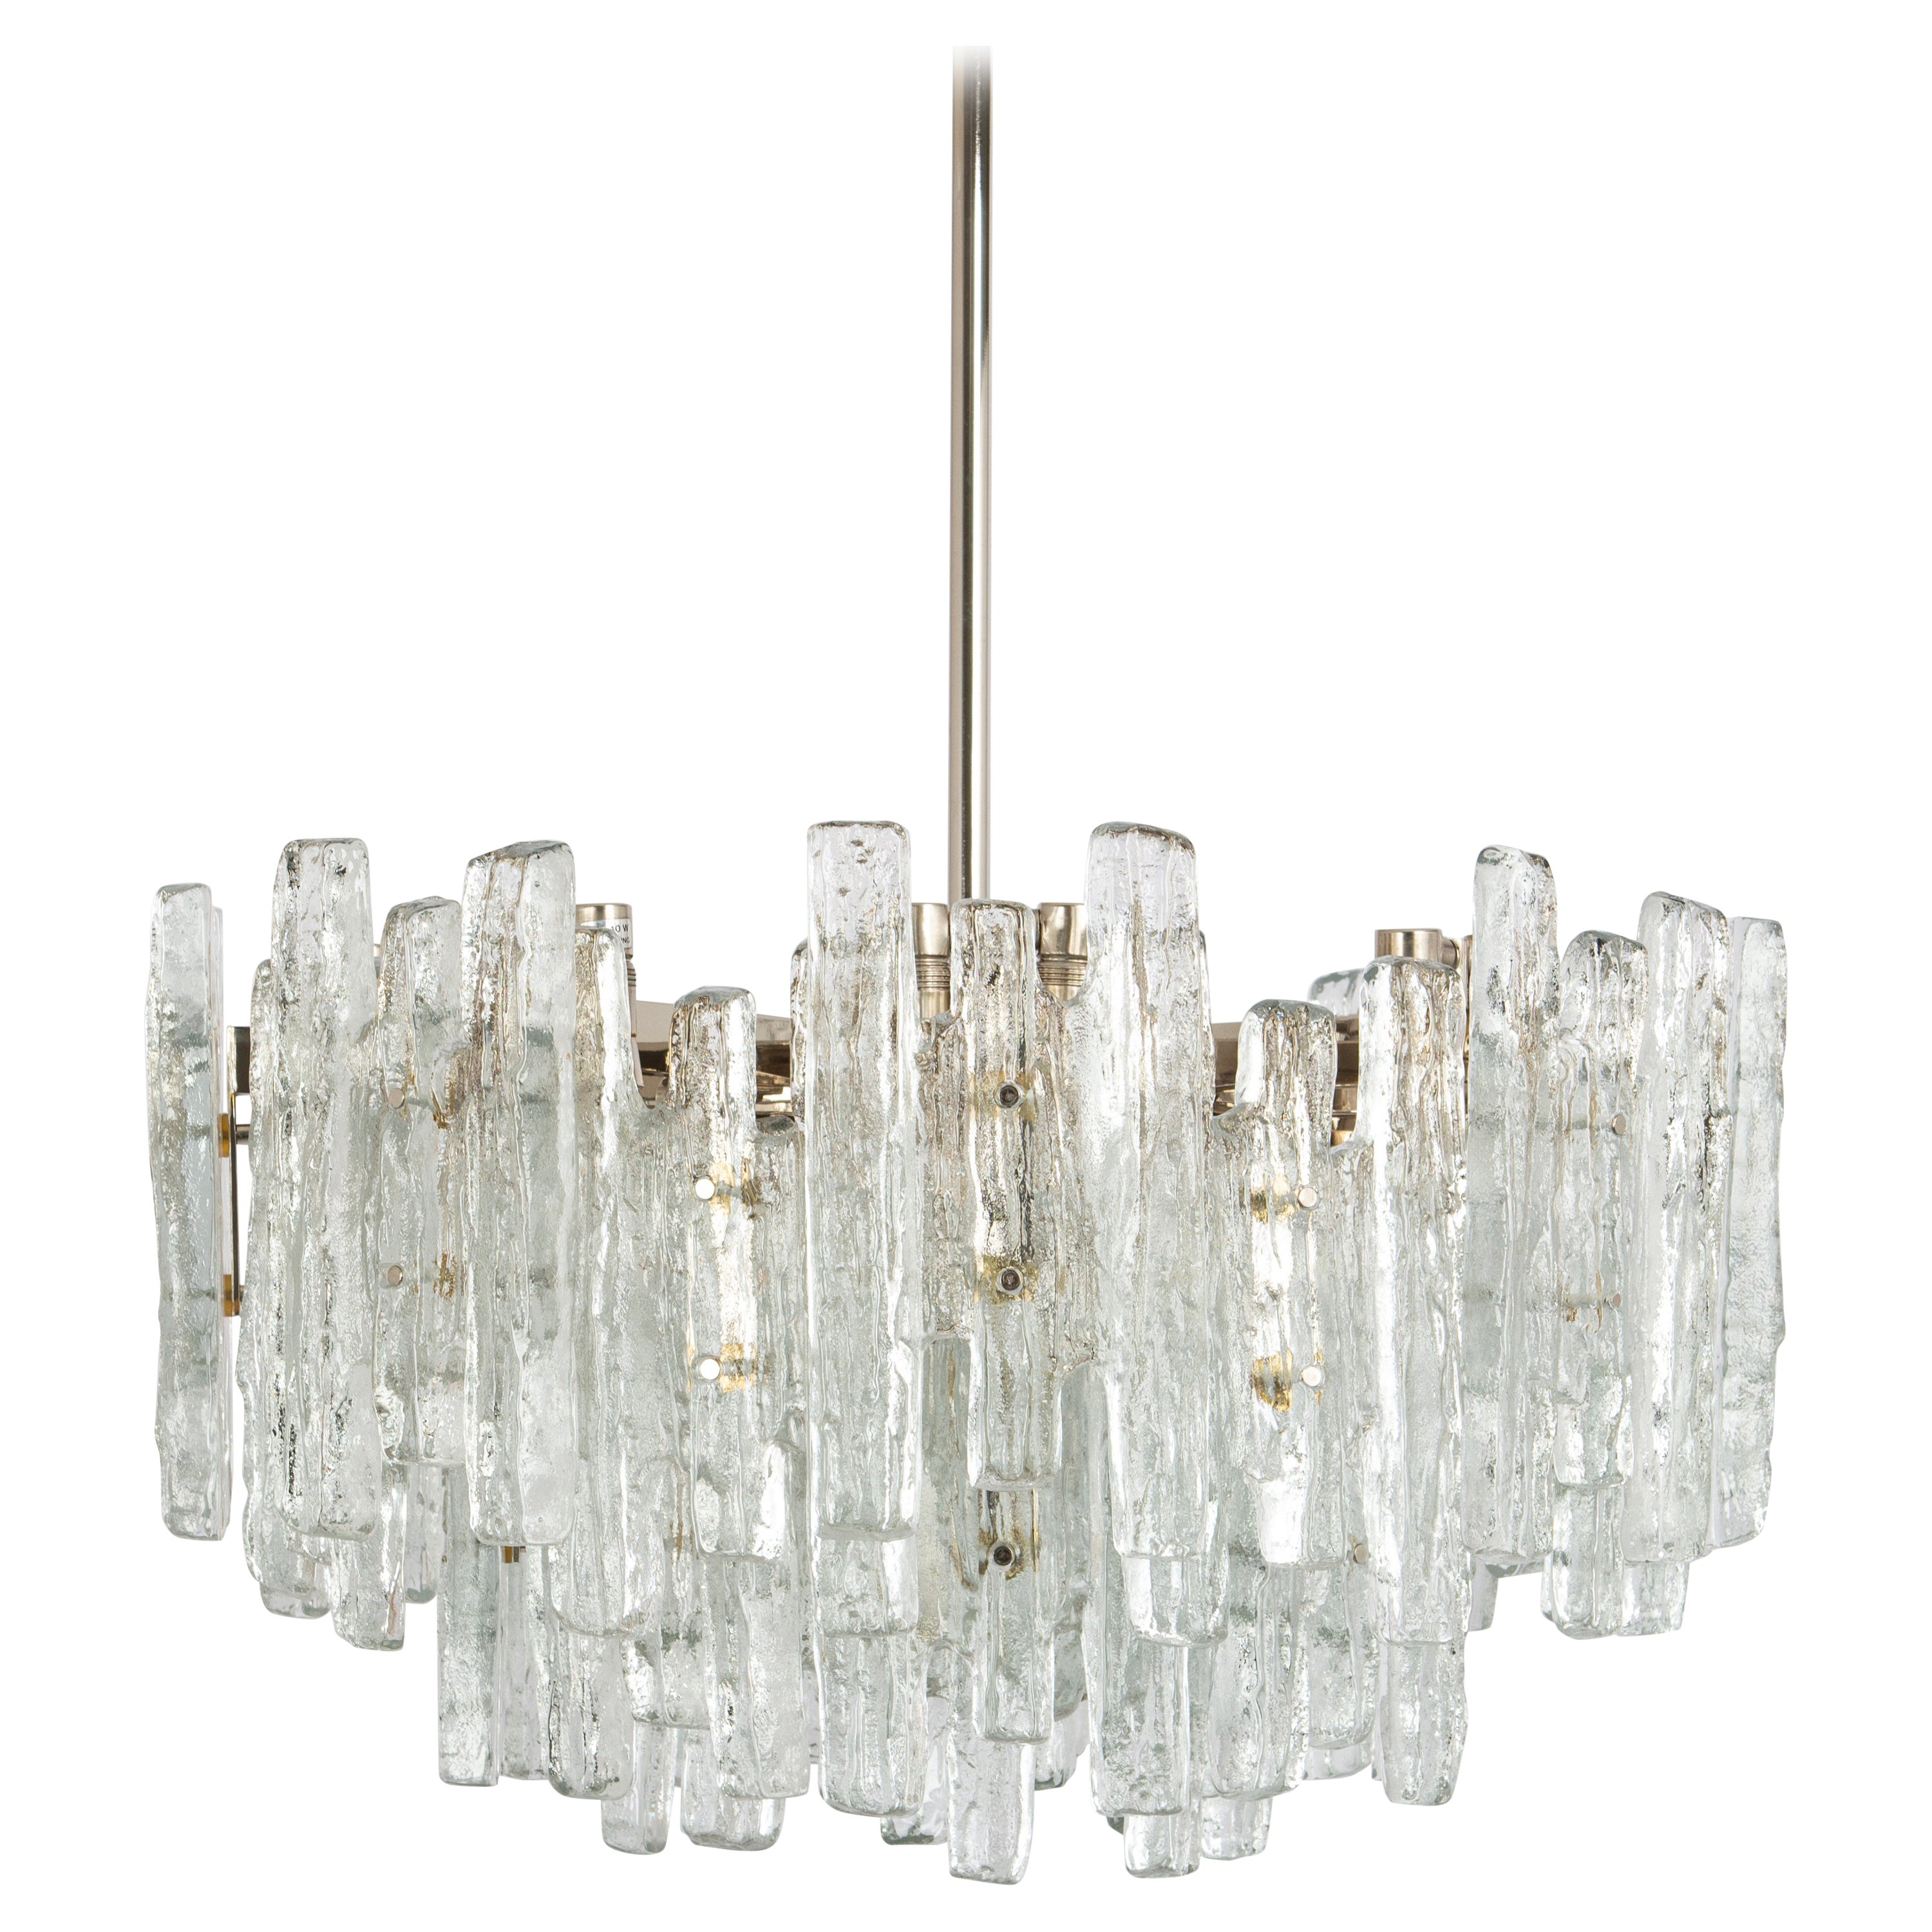 Large Rare Murano Ice Glass Chandelier by Kalmar, Austria, 1960s For Sale